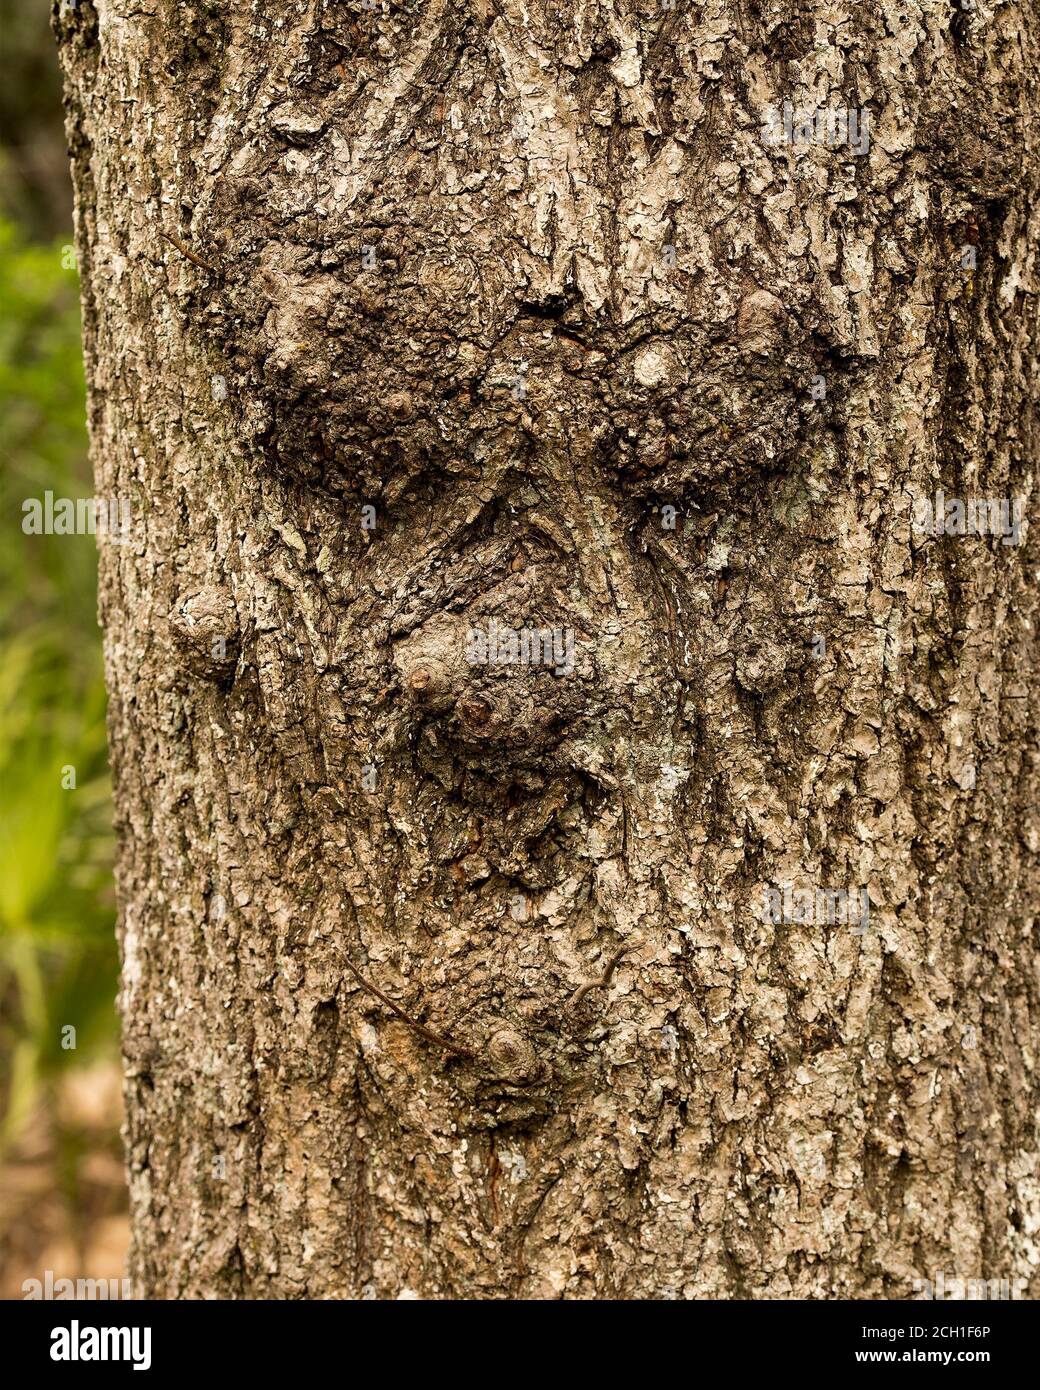 Tree with human face in nature with a majestic illusion in forest, a rarity and amazing phenomena. Stock Photo